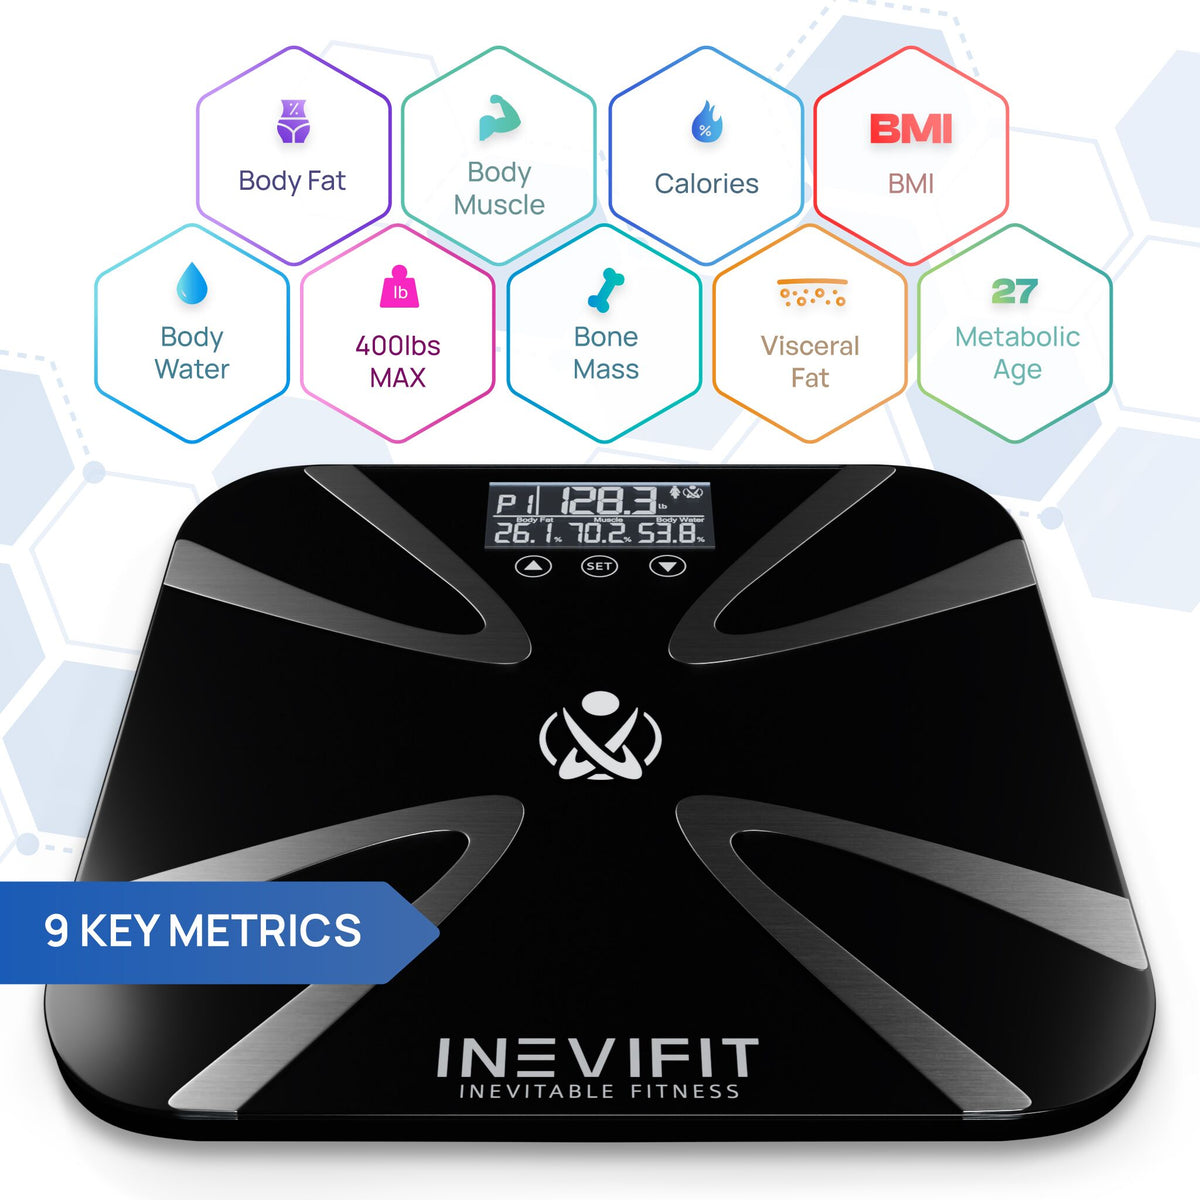 INEVIFIT Smart Body Fat Scale with Bluetooth and Free Tracking INEVIFIT APP  - White 